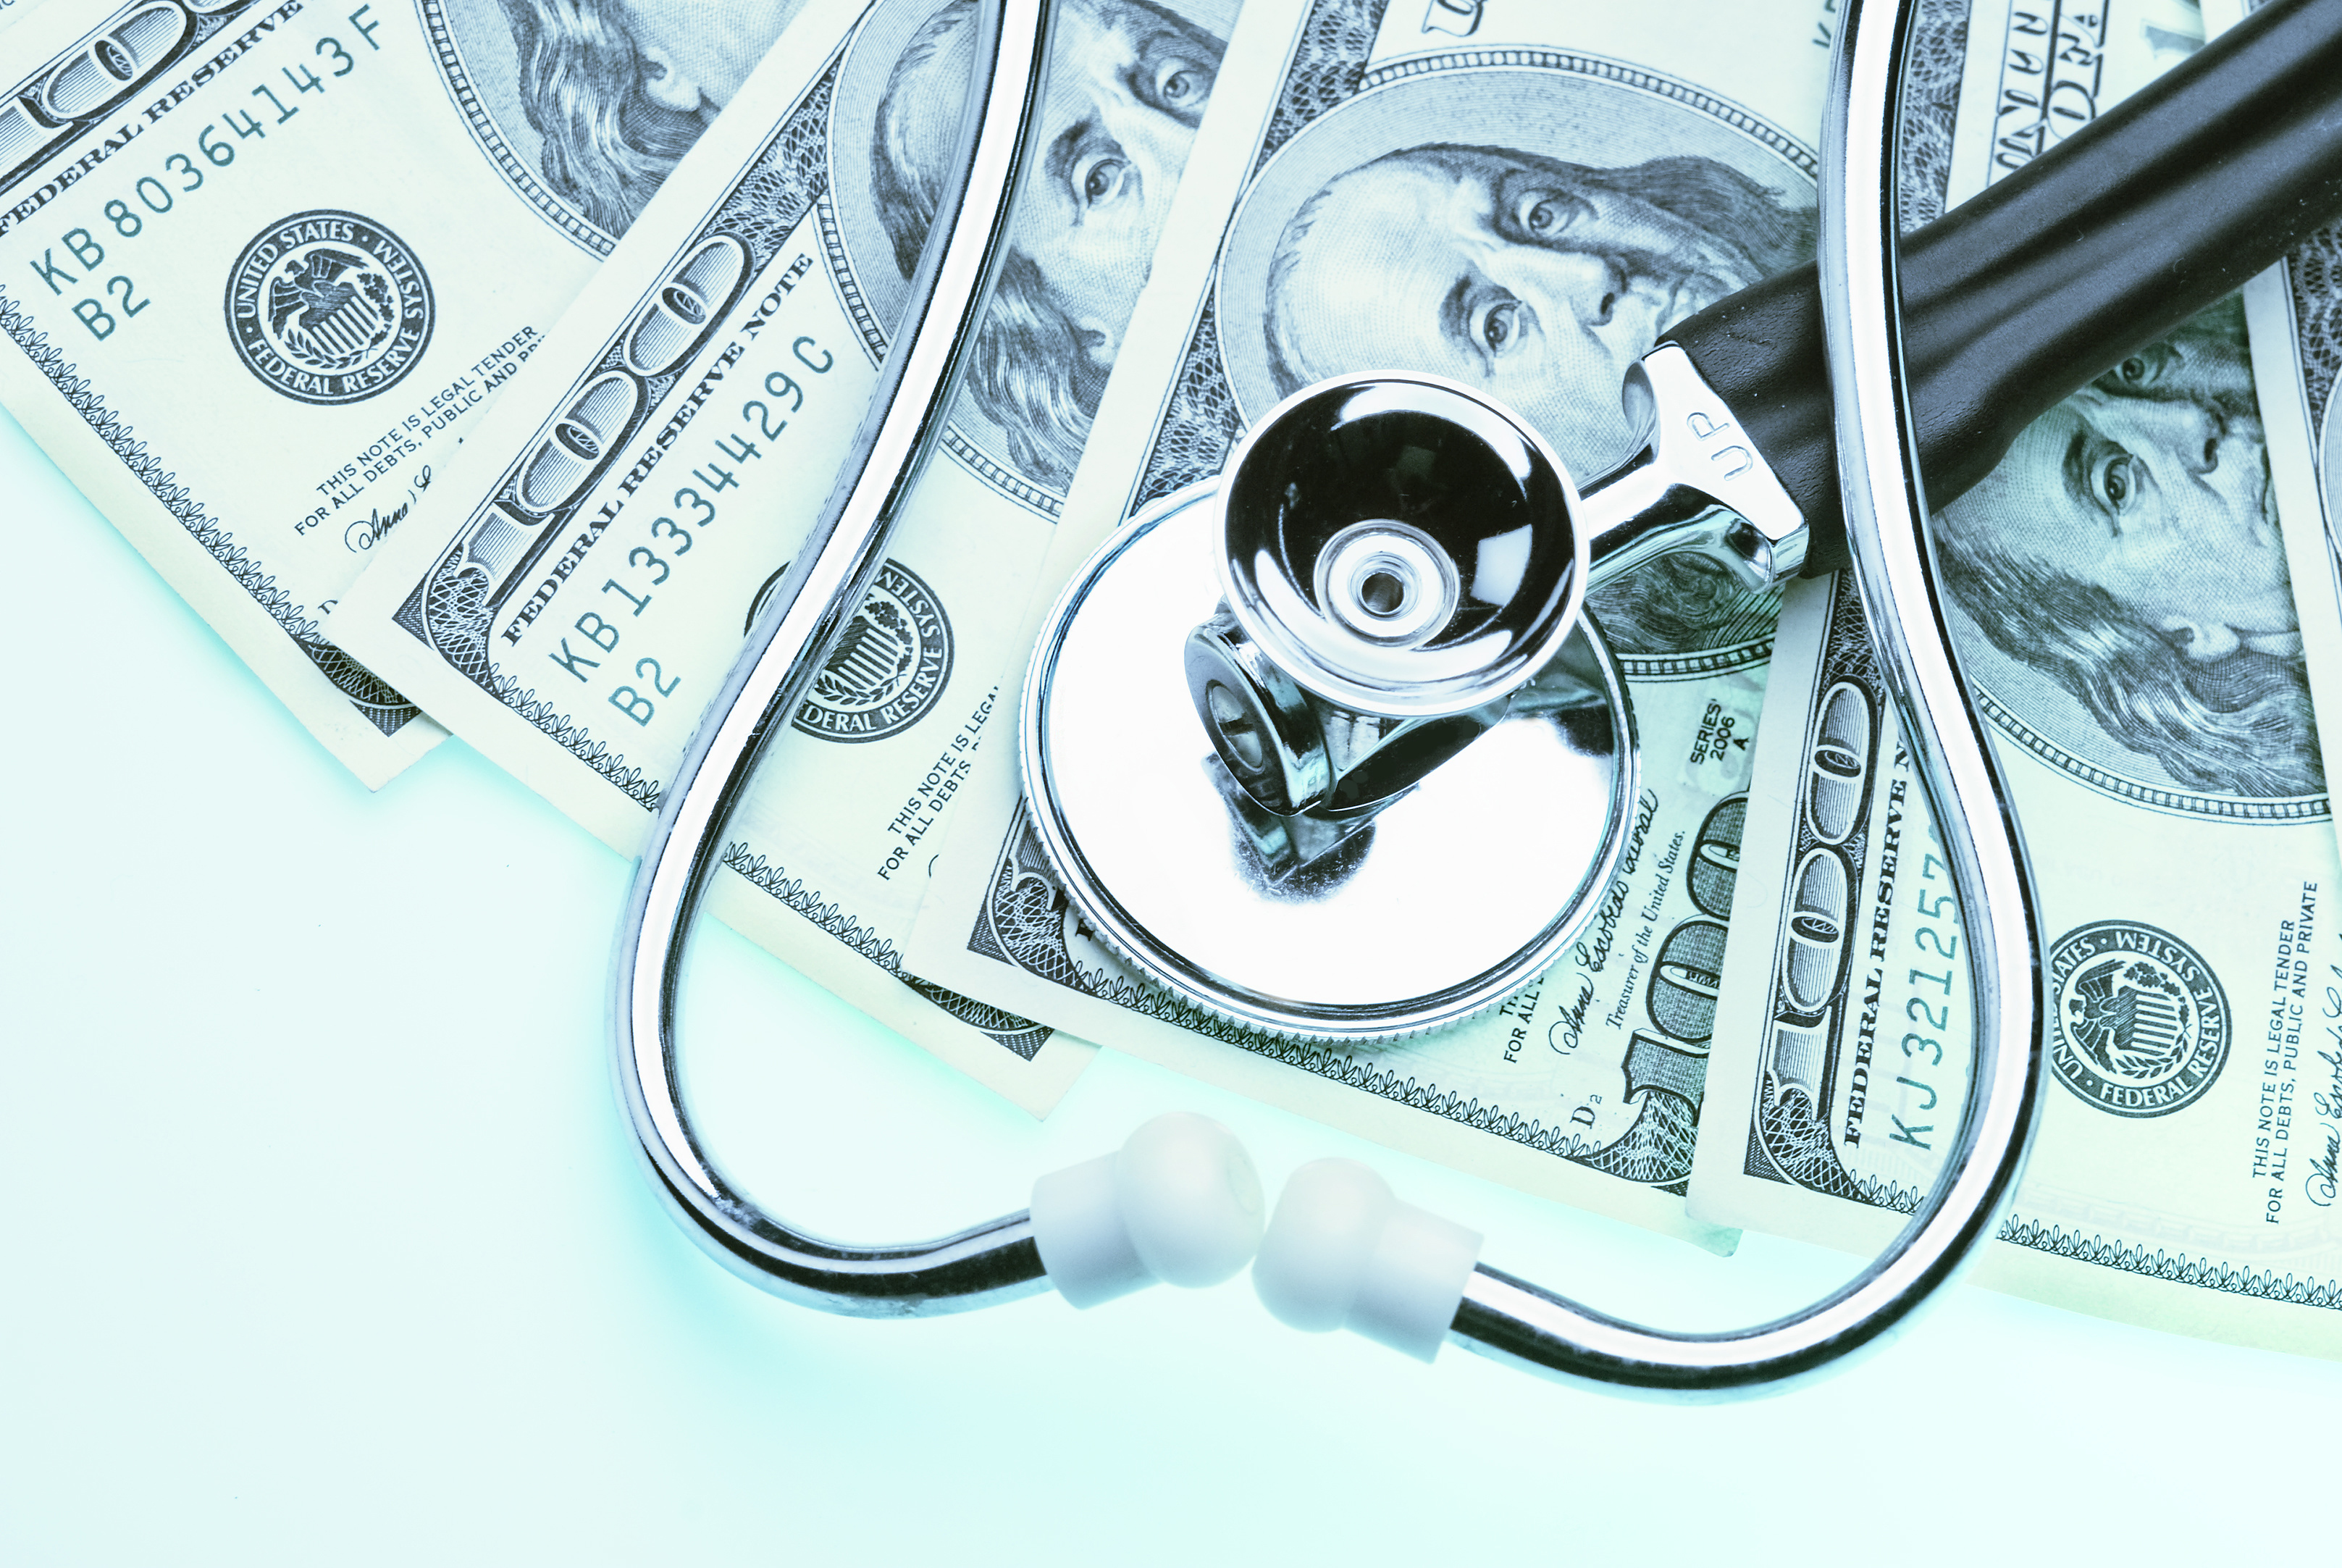 Money for health care